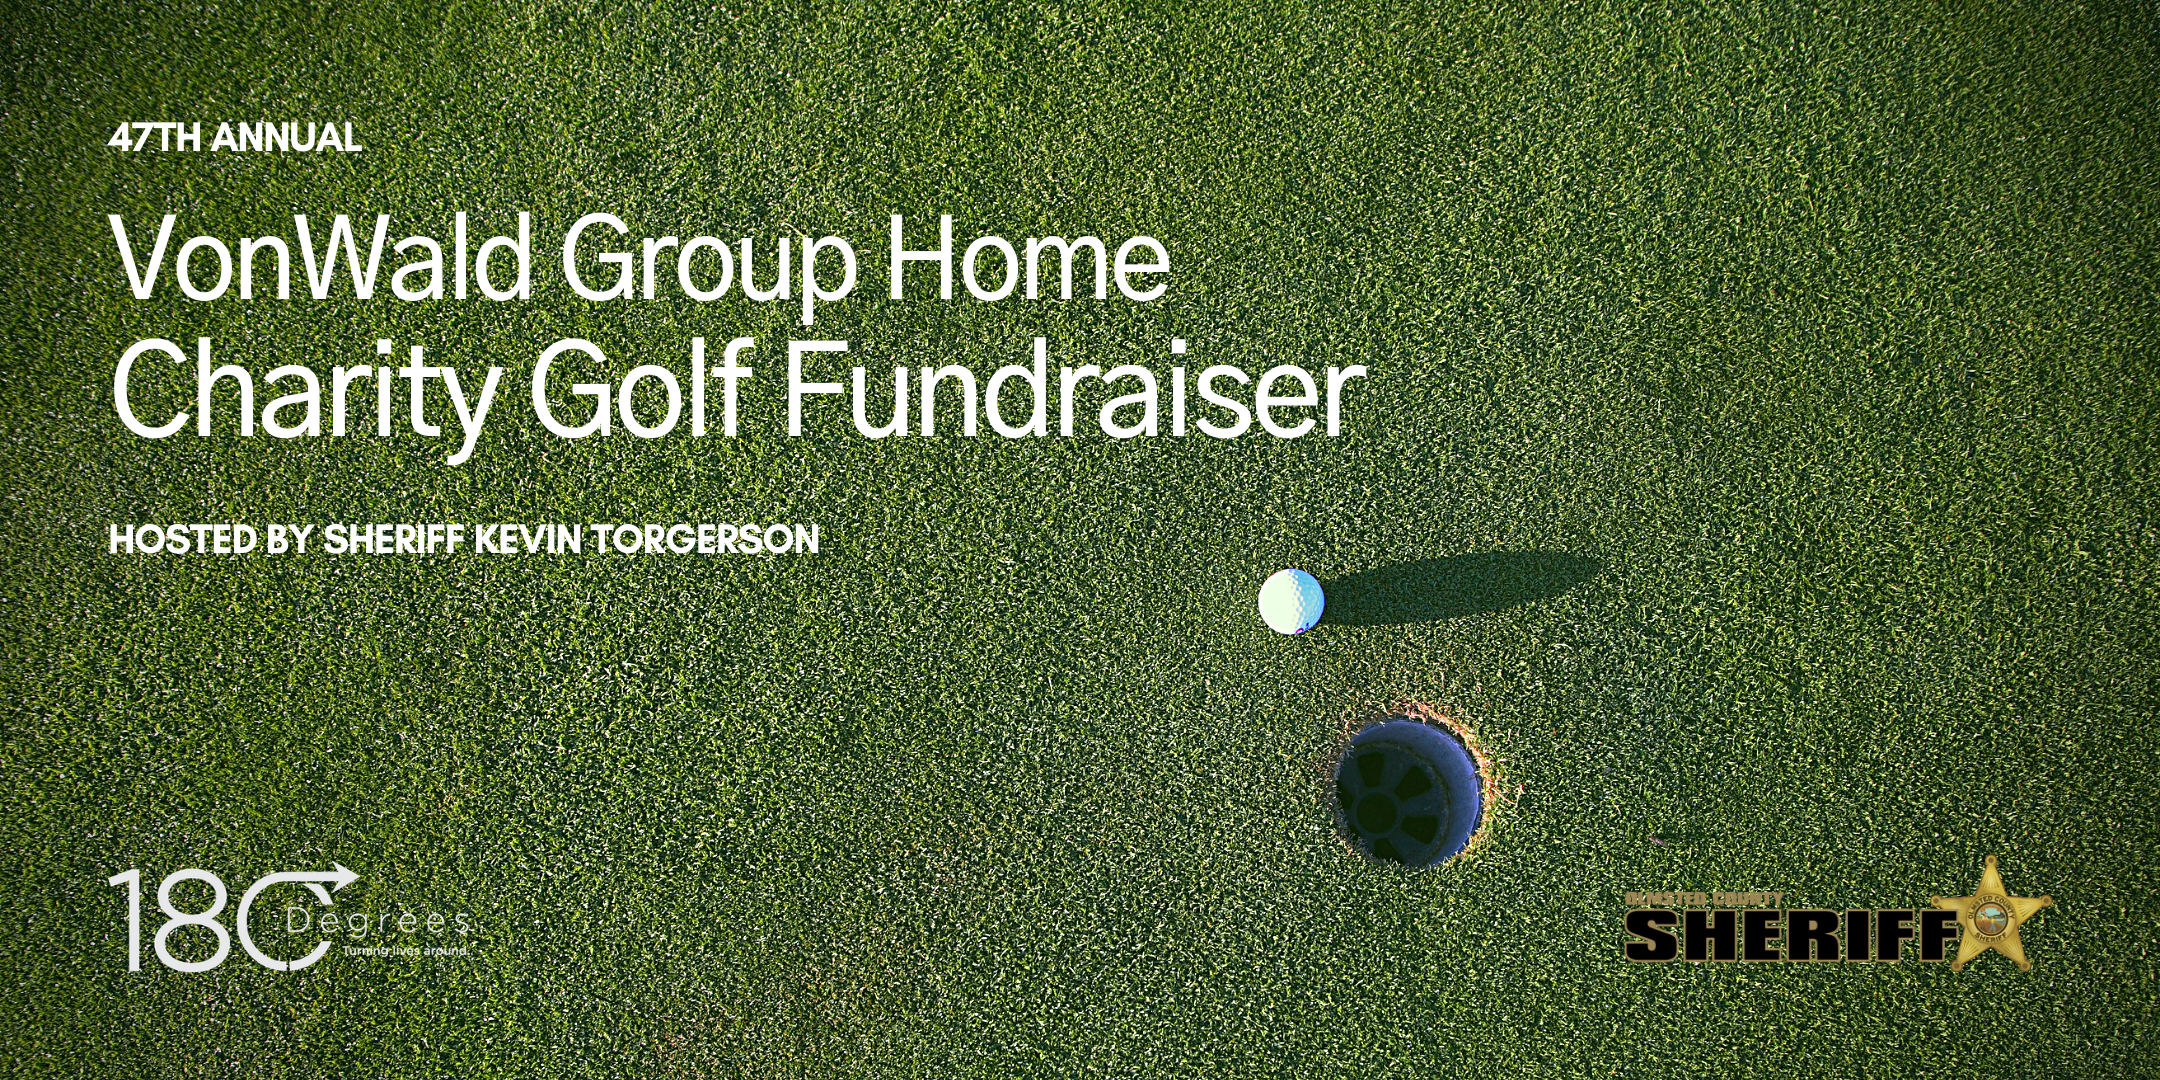 VonWald Group Home Charity Golf Fundraiser